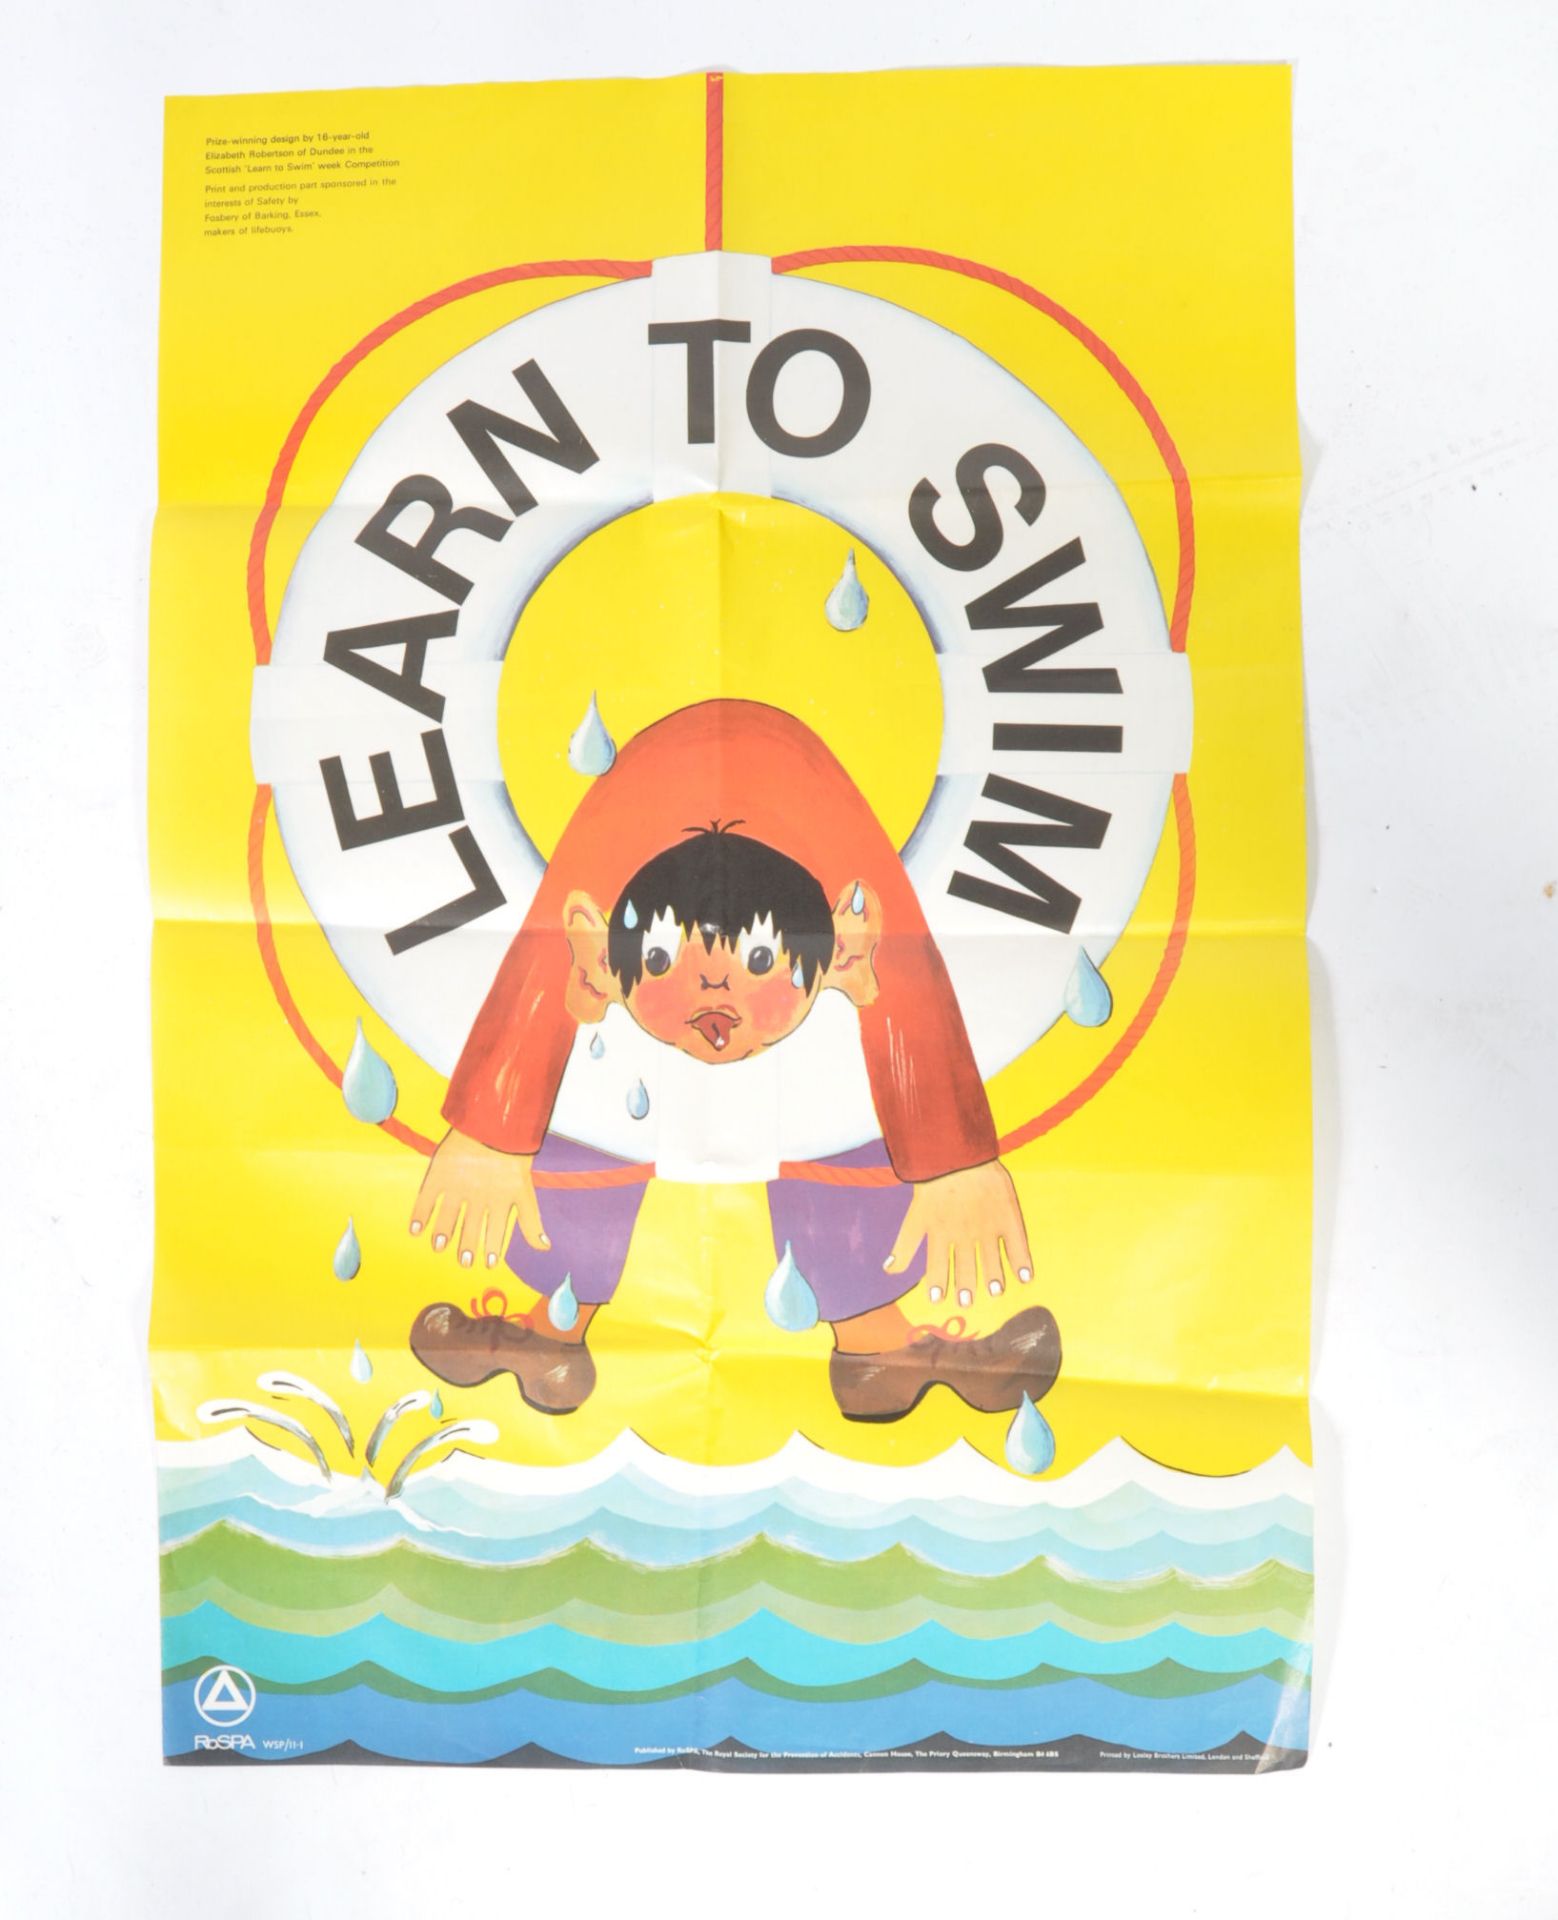 ORIGINAL RARE VINTAGE 1970S RoSPA SAFETY POSTER LEARN TO SWIM